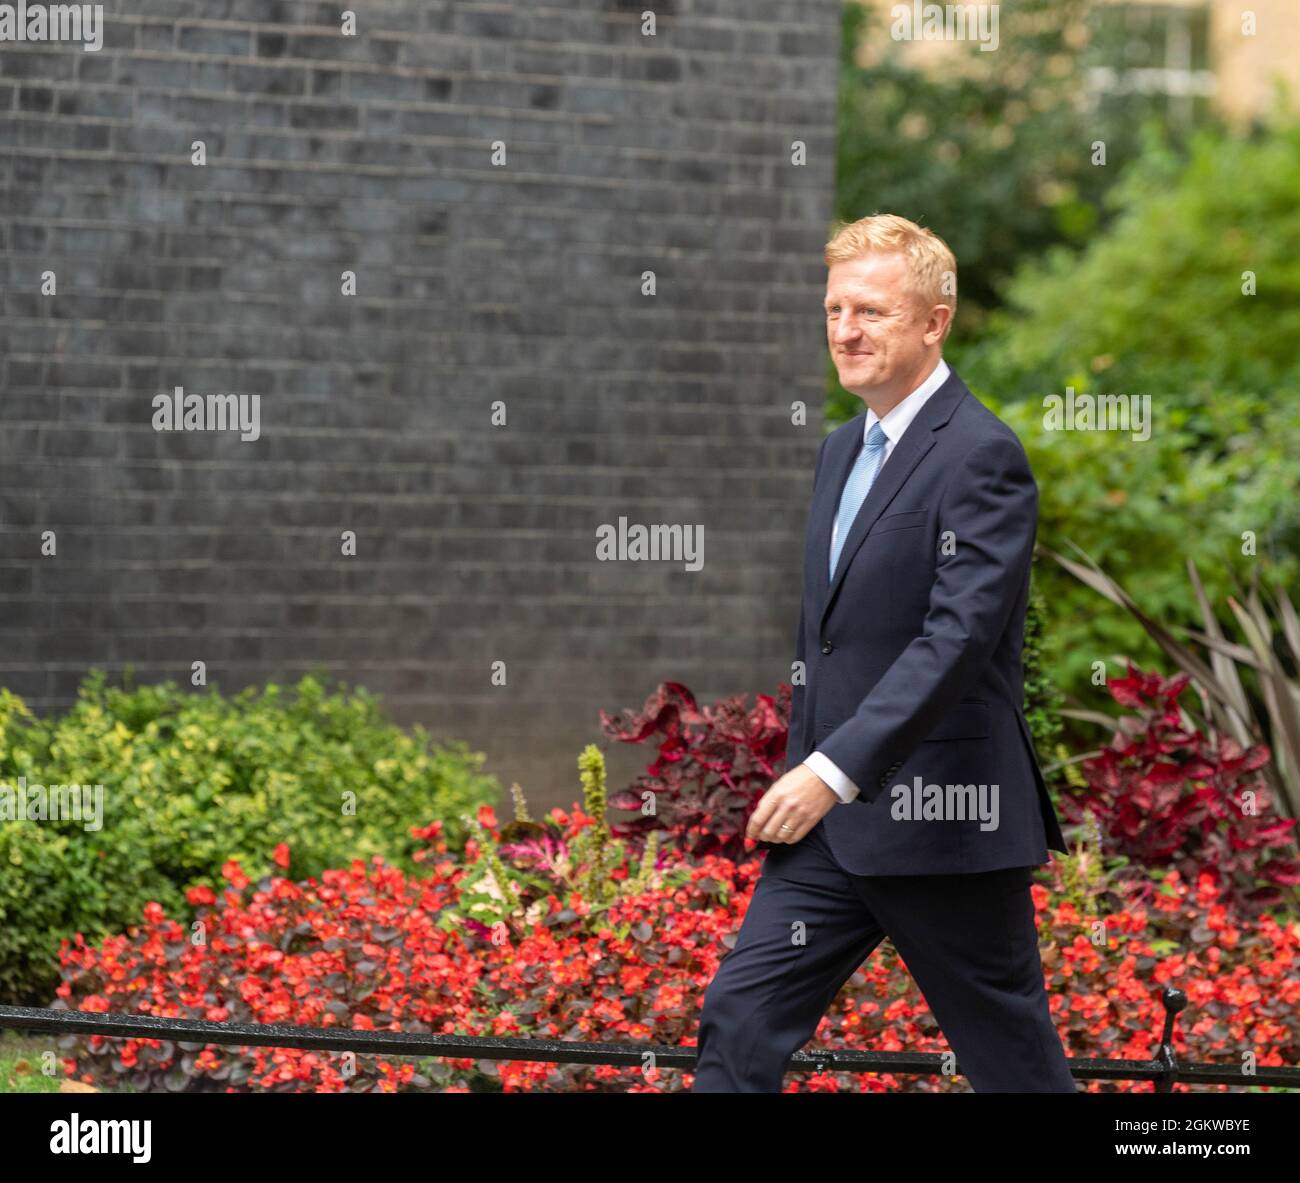 London, UK. 15th Sep, 2021. Cabinet reshuffled Downing Street London Oliver Dowden, Former Culture Secretary now a minister in the cabinet office Credit: Ian Davidson/Alamy Live News Stock Photo